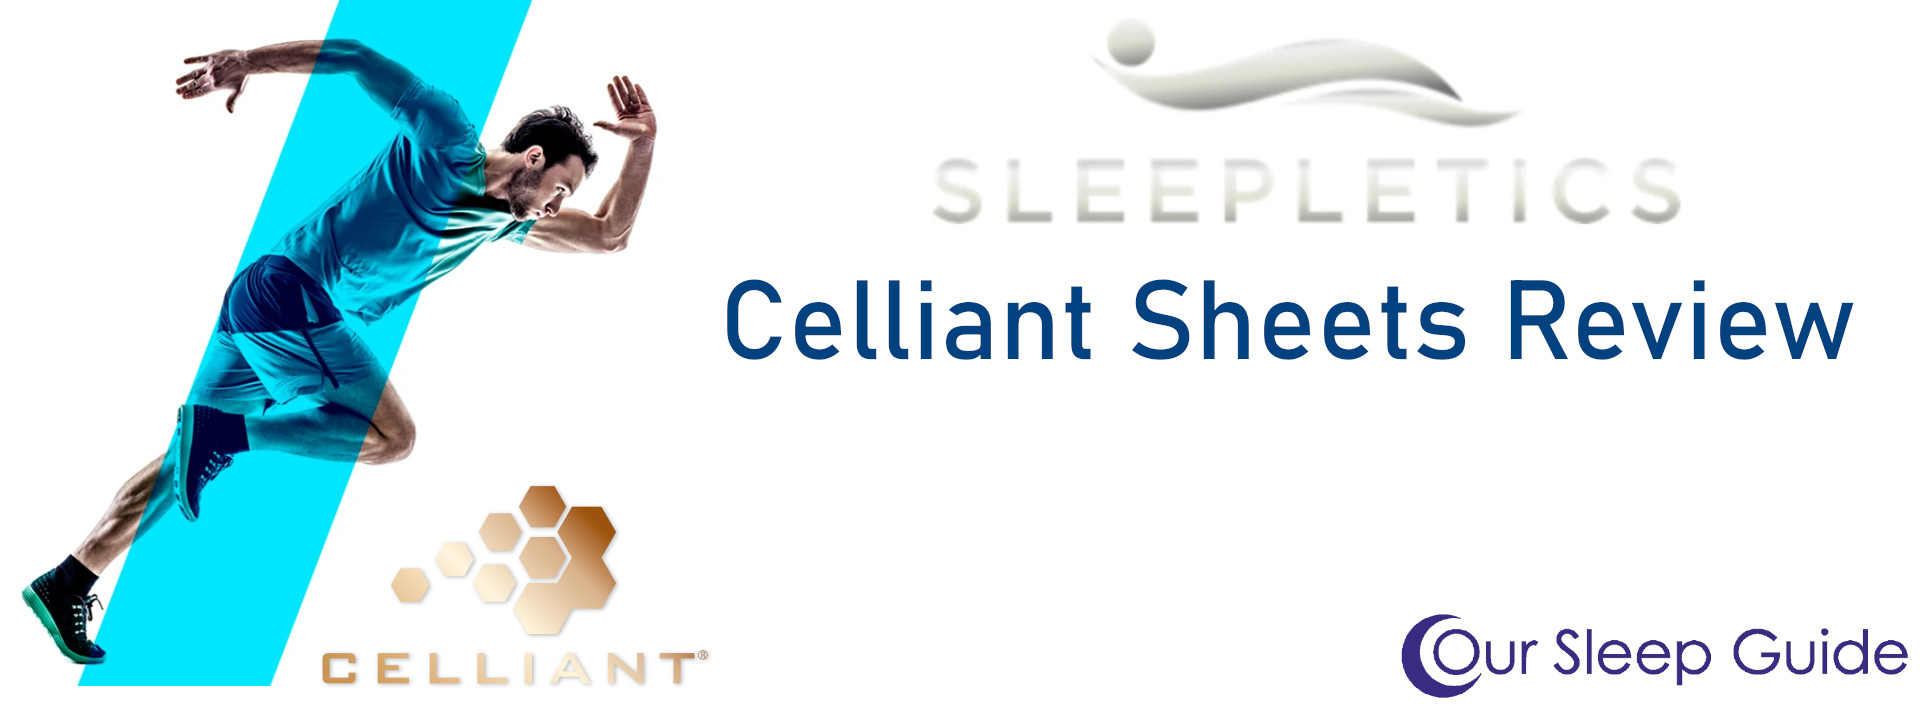 sleepletics celliant sheets review